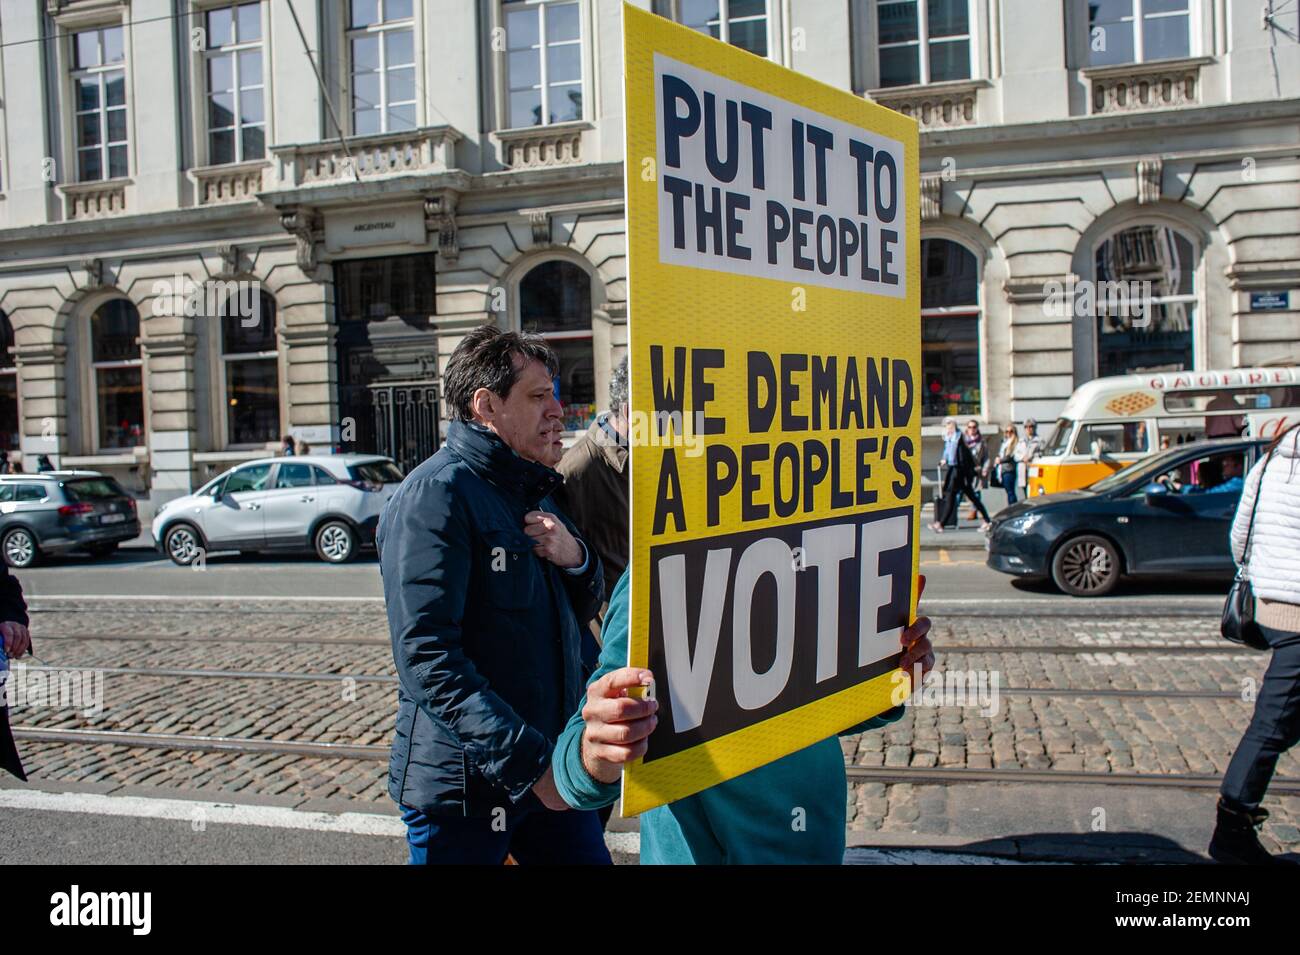 A man is holding a huge placard in front of him during the March for Europe celebrated in Brussels, on March 24th, 2019. A day before the anniversary of the founding Treaty of the European Union, citizens and civil society organizations took the streets of Brussels to make a stand, two months before the European elections. The march was organized by Together platform, an initiative launched by an alliance of progressive political groups from across Europe. They stand for solidarity, democracy, and peace against the real threat to their core European values.(Photo by Romy Fernandez/Sipa USA) Stock Photo